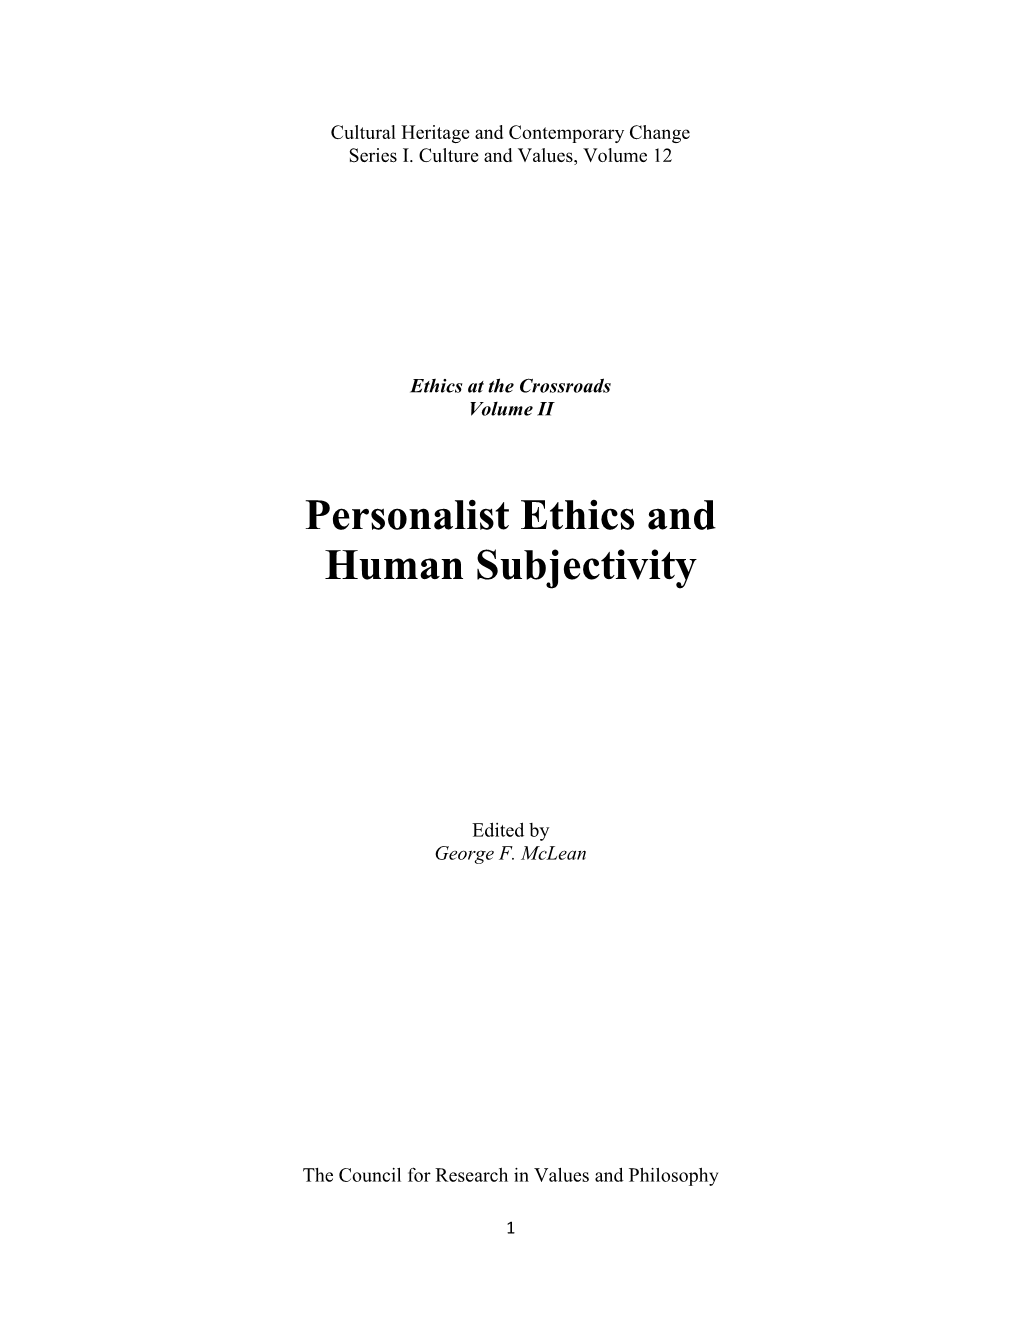 Personalist Ethics and Human Subjectivity